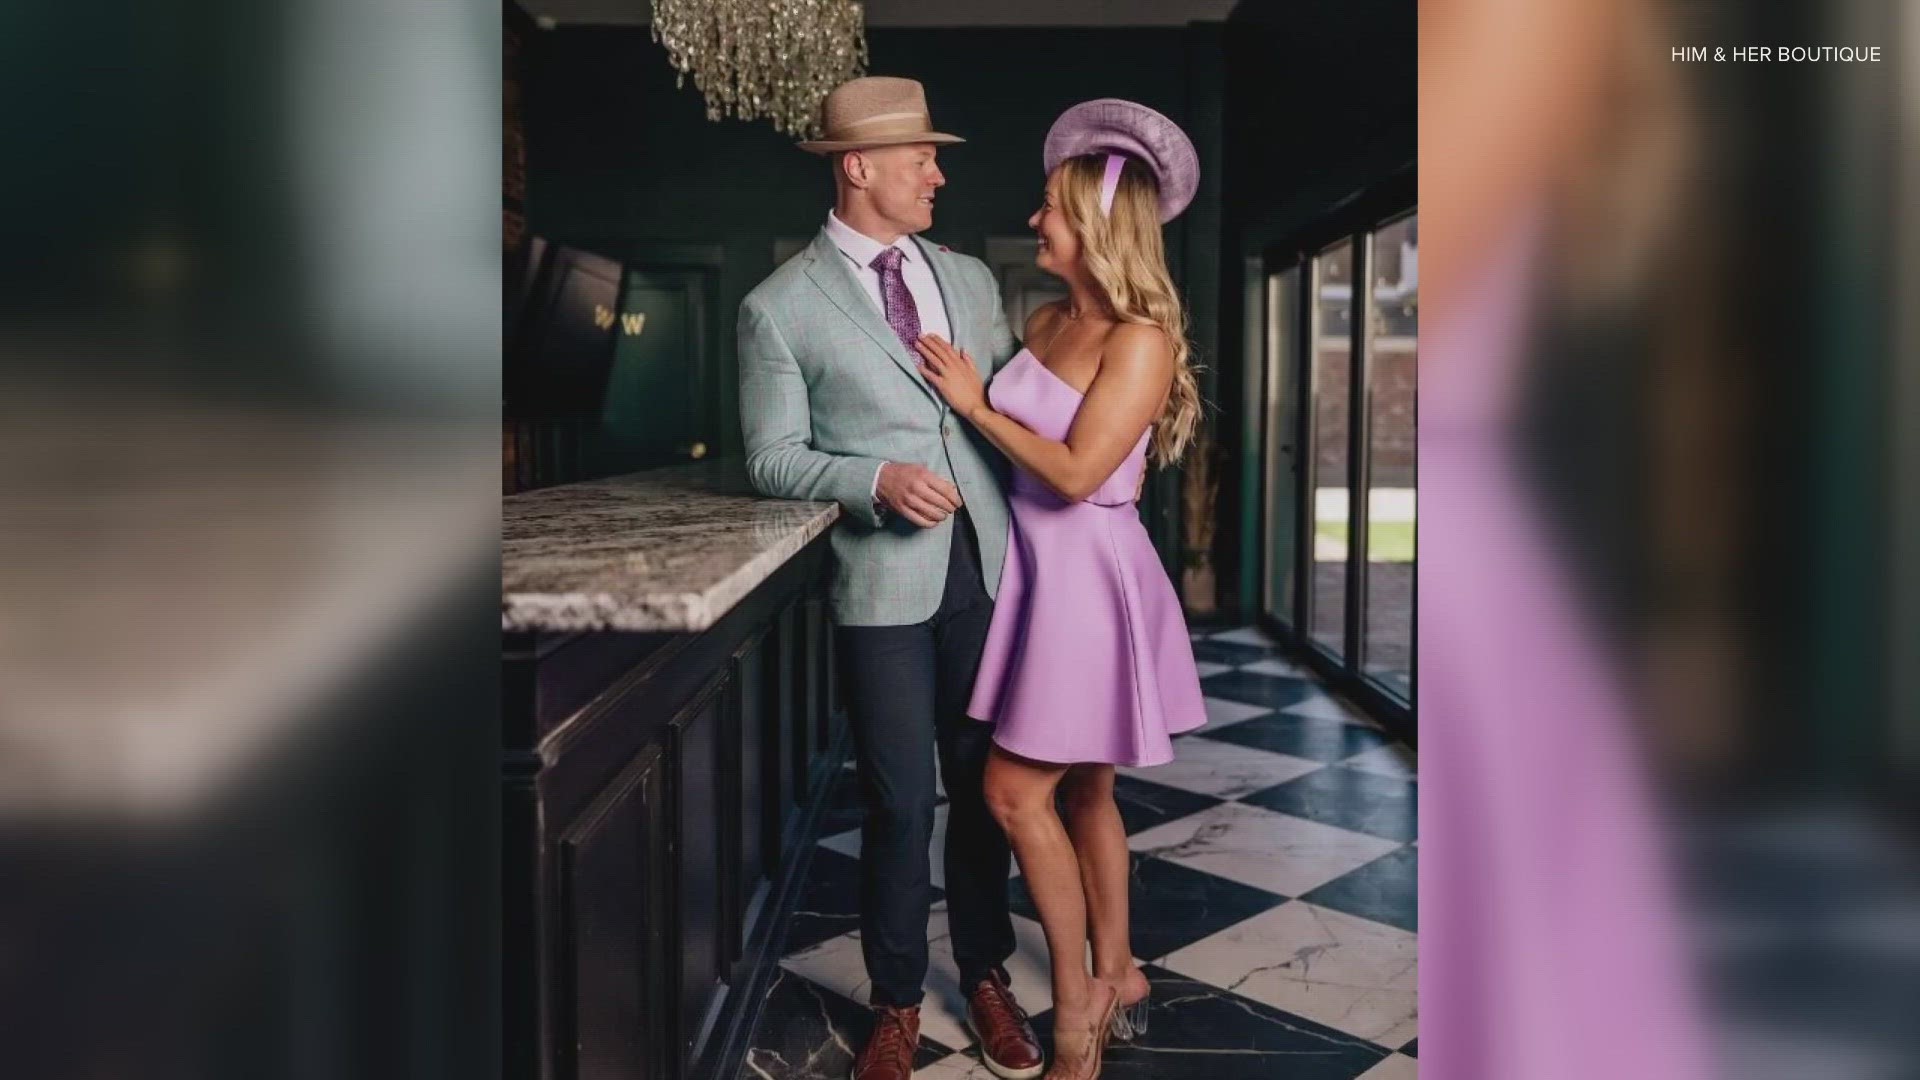 If you haven't picked your outfit for the Kentucky Derby yet, it's time to start shopping.